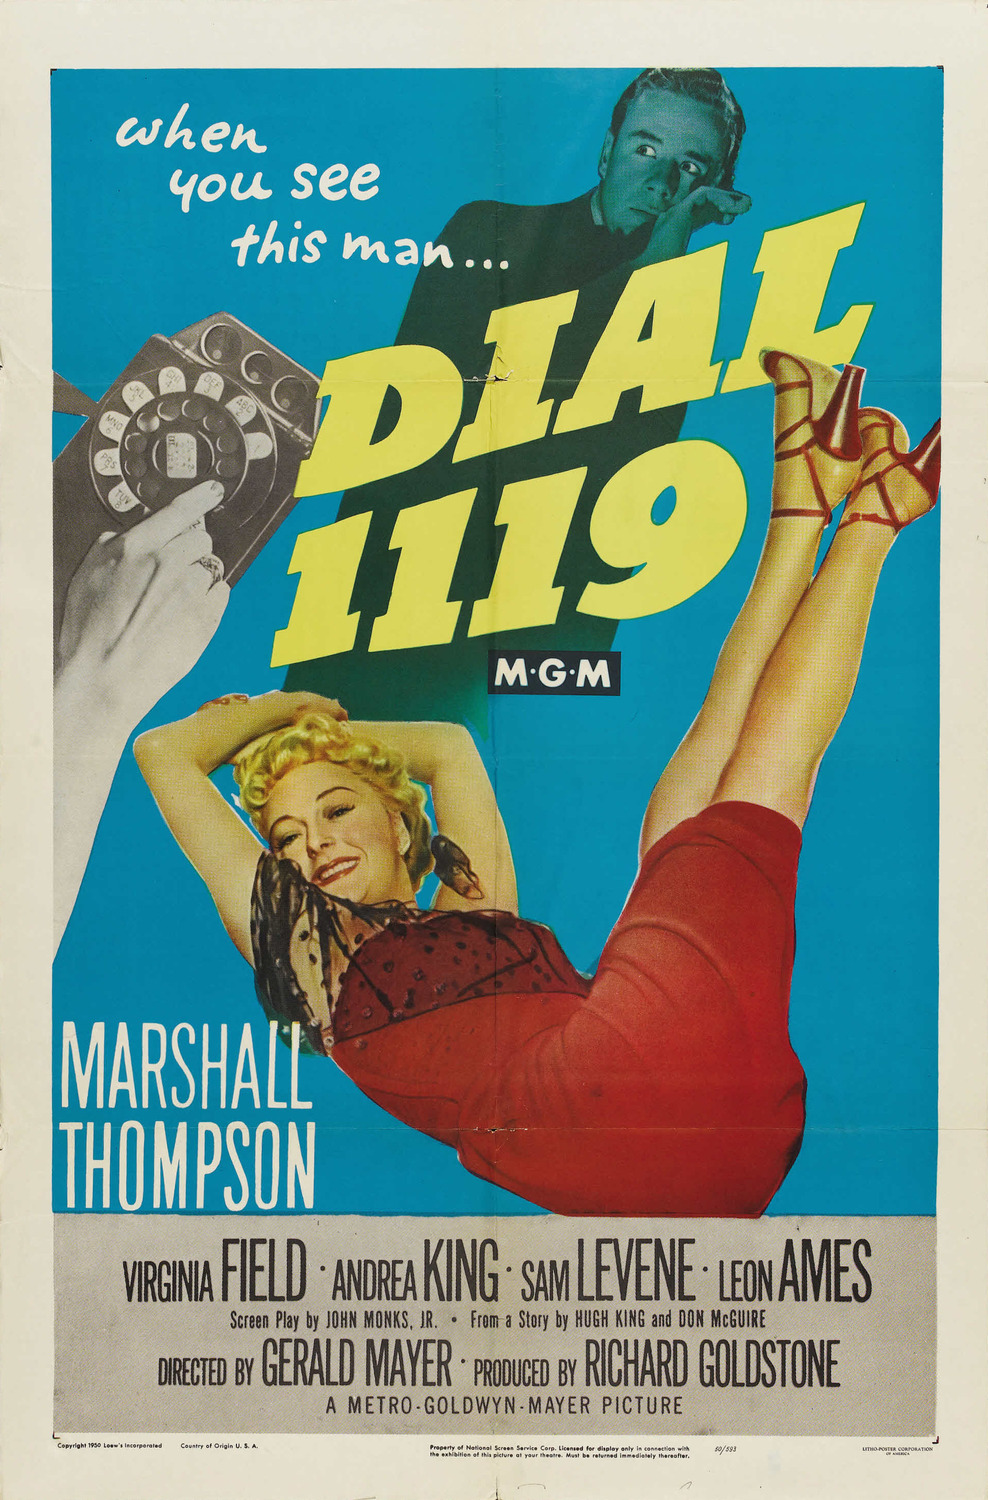 Extra Large Movie Poster Image for Dial 1119 